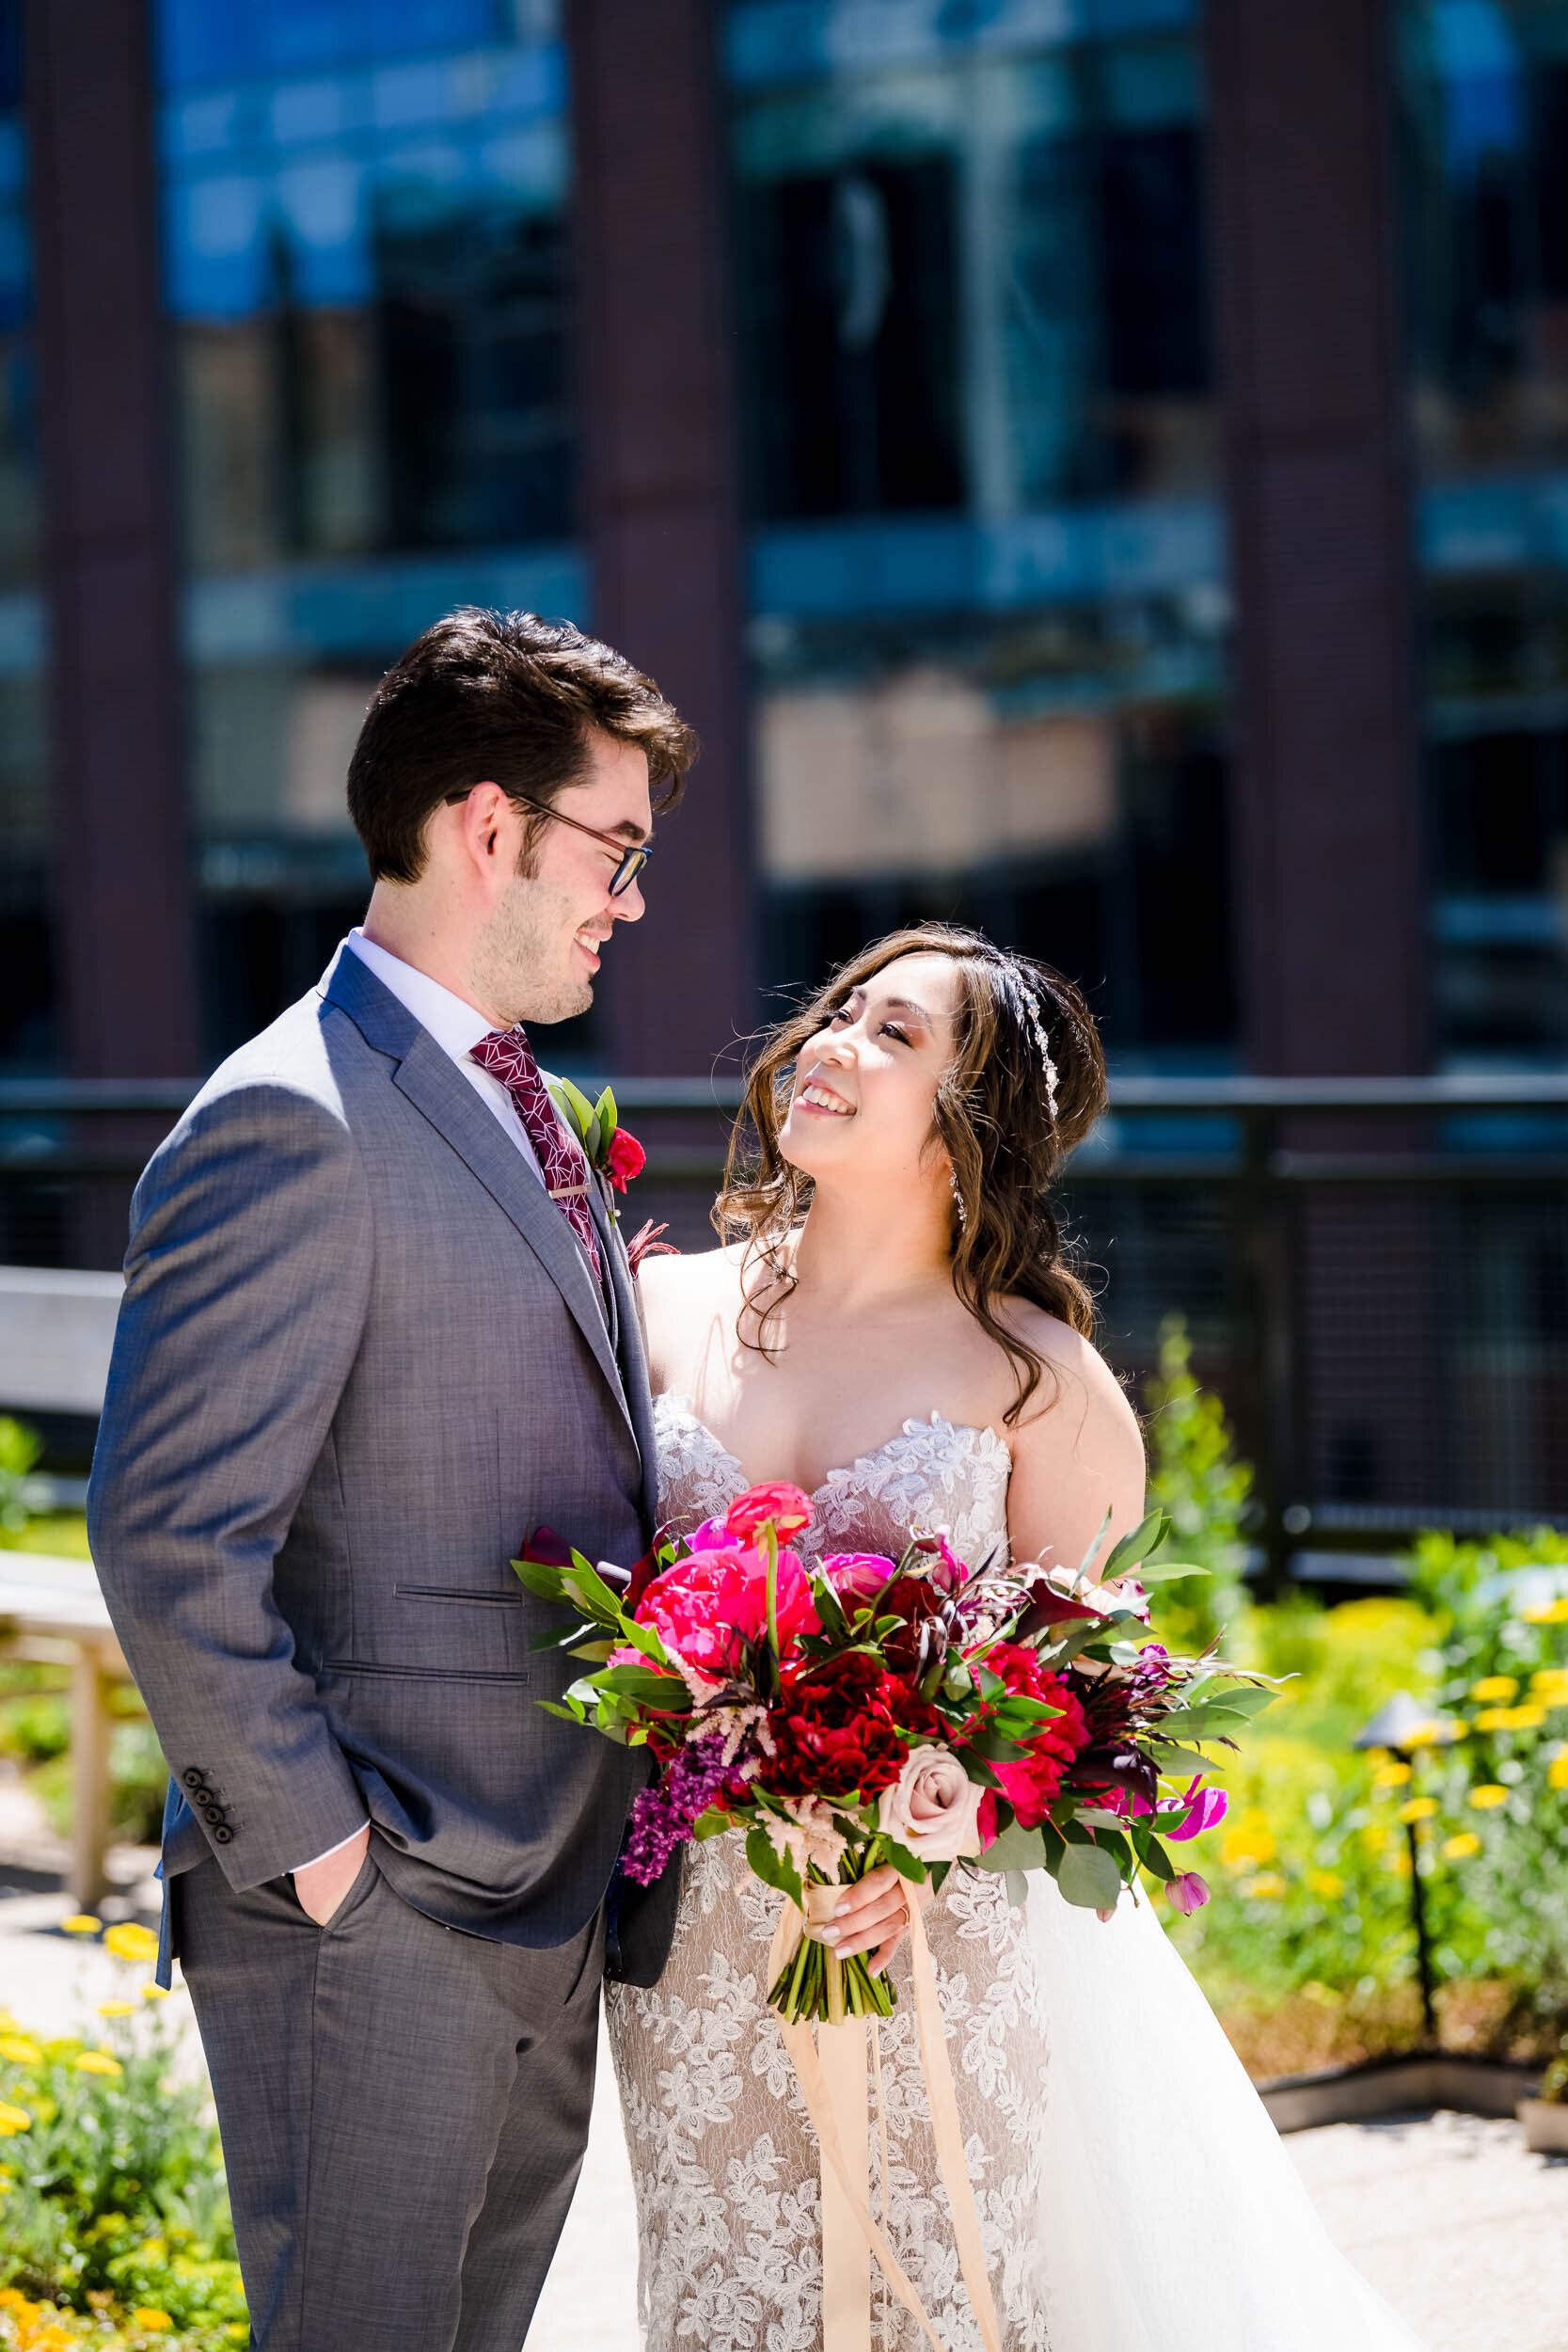 Wedding Day Photos | Ace Hotel | J. Brown Photography | bride and groom rooftop portrait.